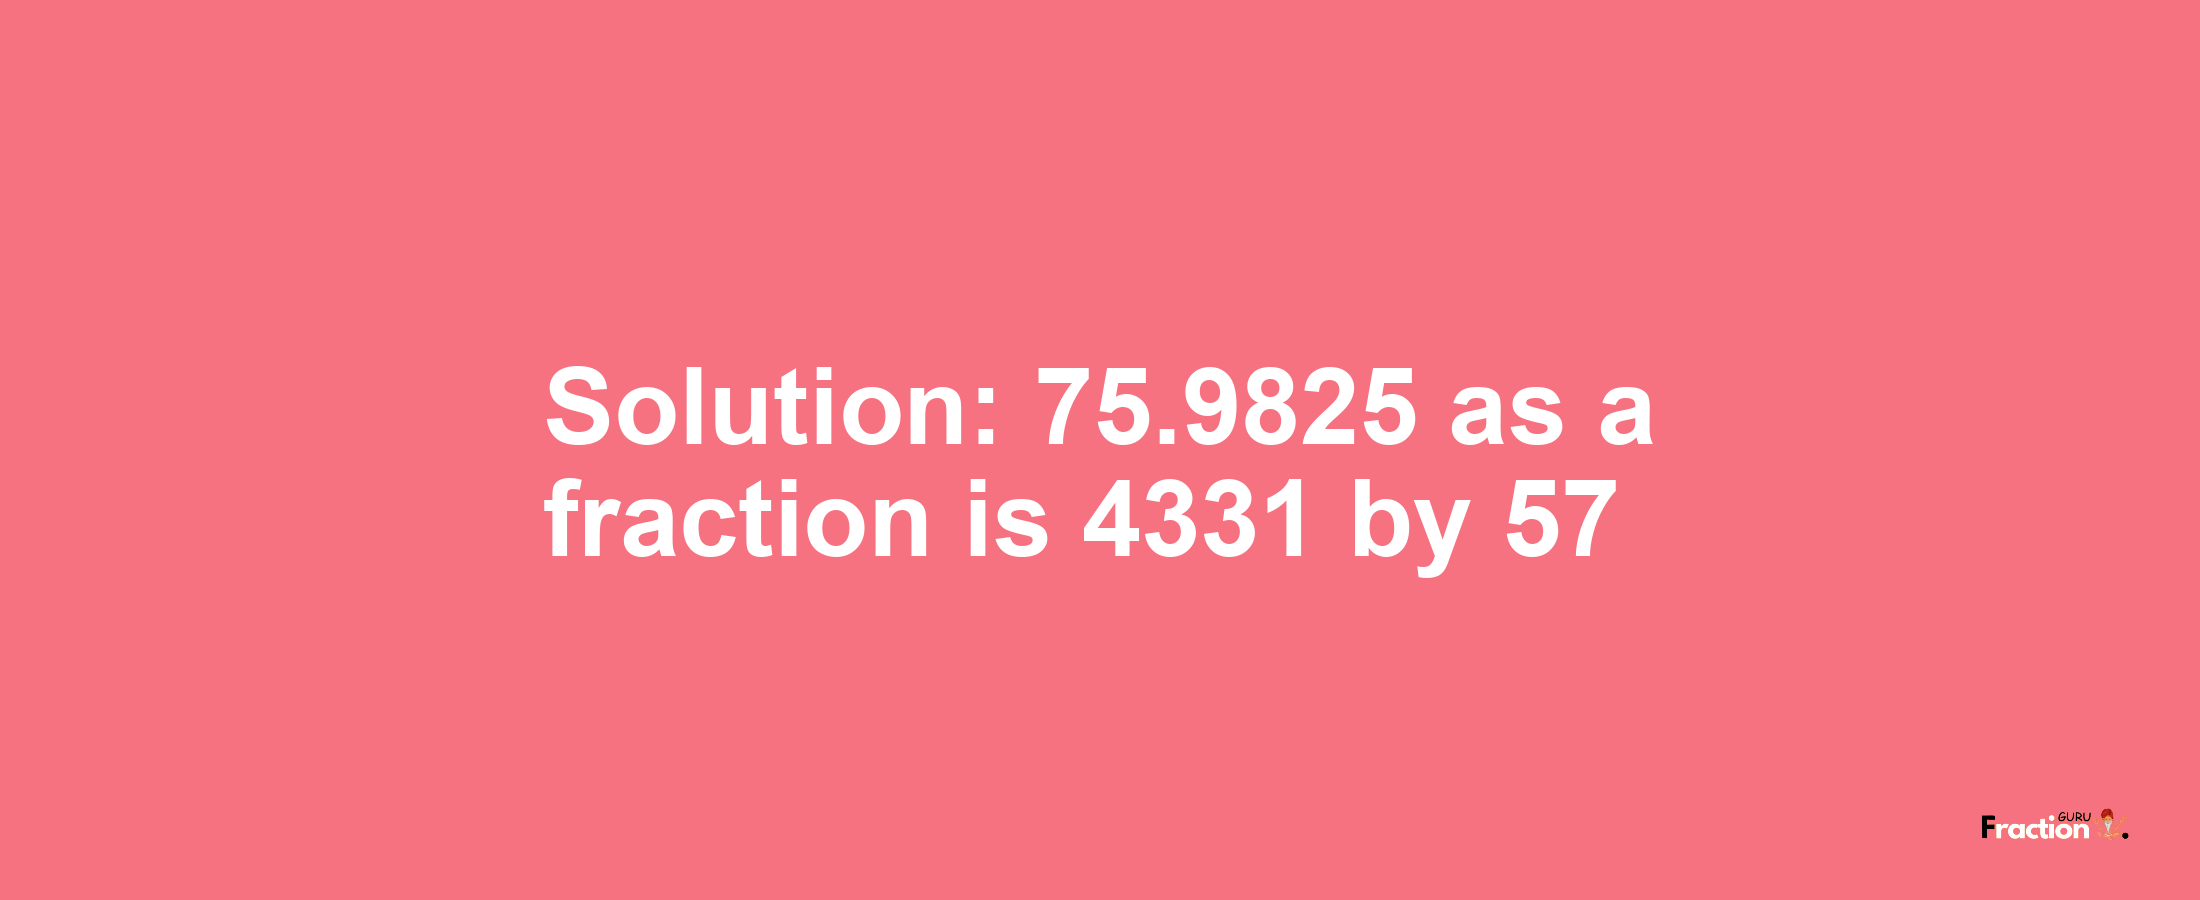 Solution:75.9825 as a fraction is 4331/57